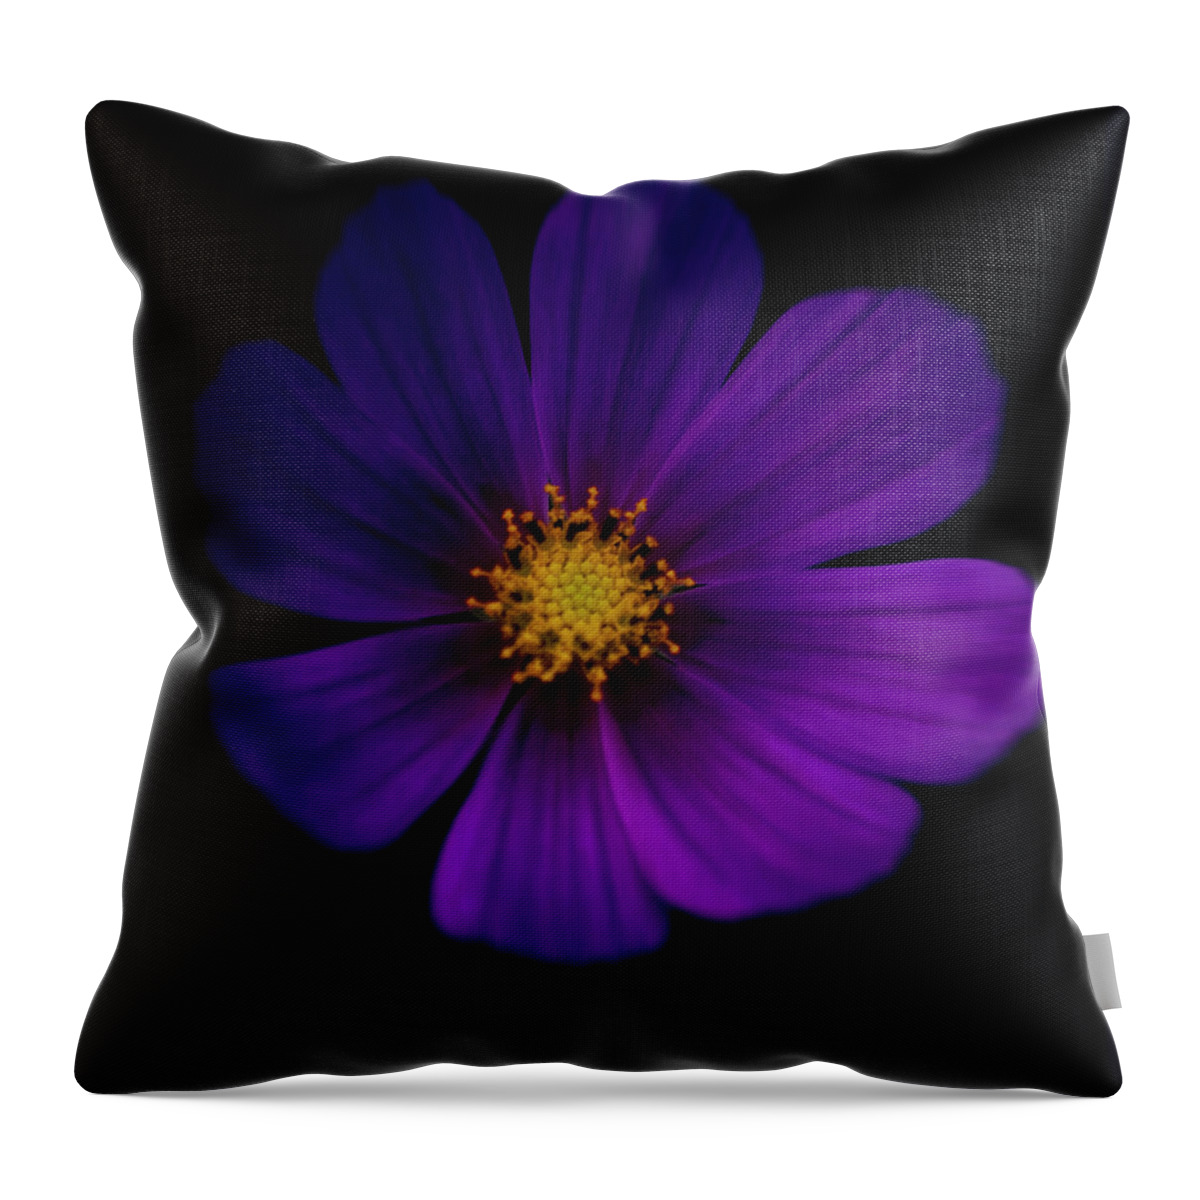 Purple Throw Pillow featuring the photograph Purple Flower Close Up On A Black by Michael Duva